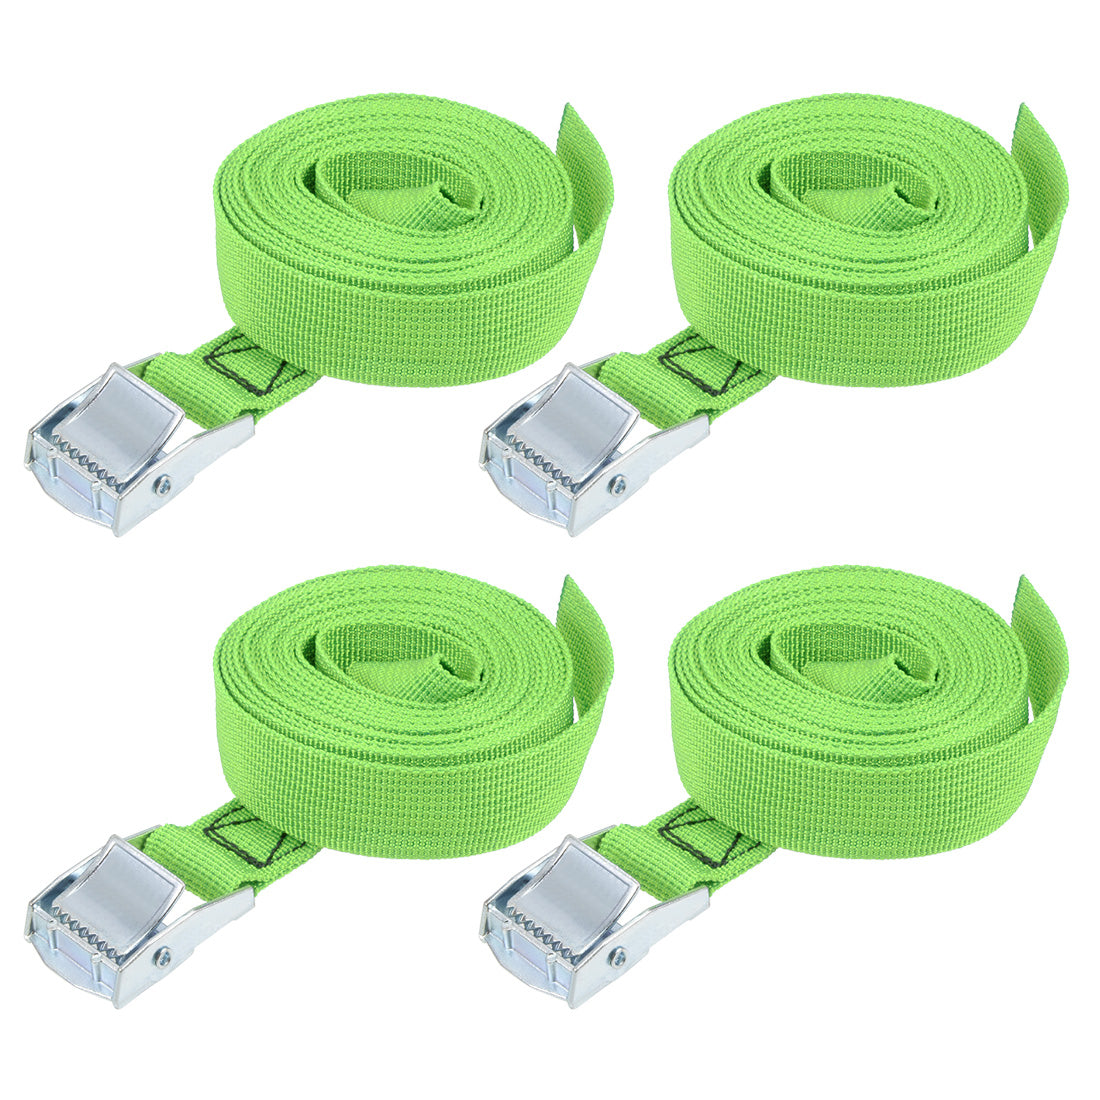 uxcell Uxcell Lashing Strap 1" x 10' Cargo Tie Down Straps with Cam Lock Buckle Up to 551lbs Green 4pcs